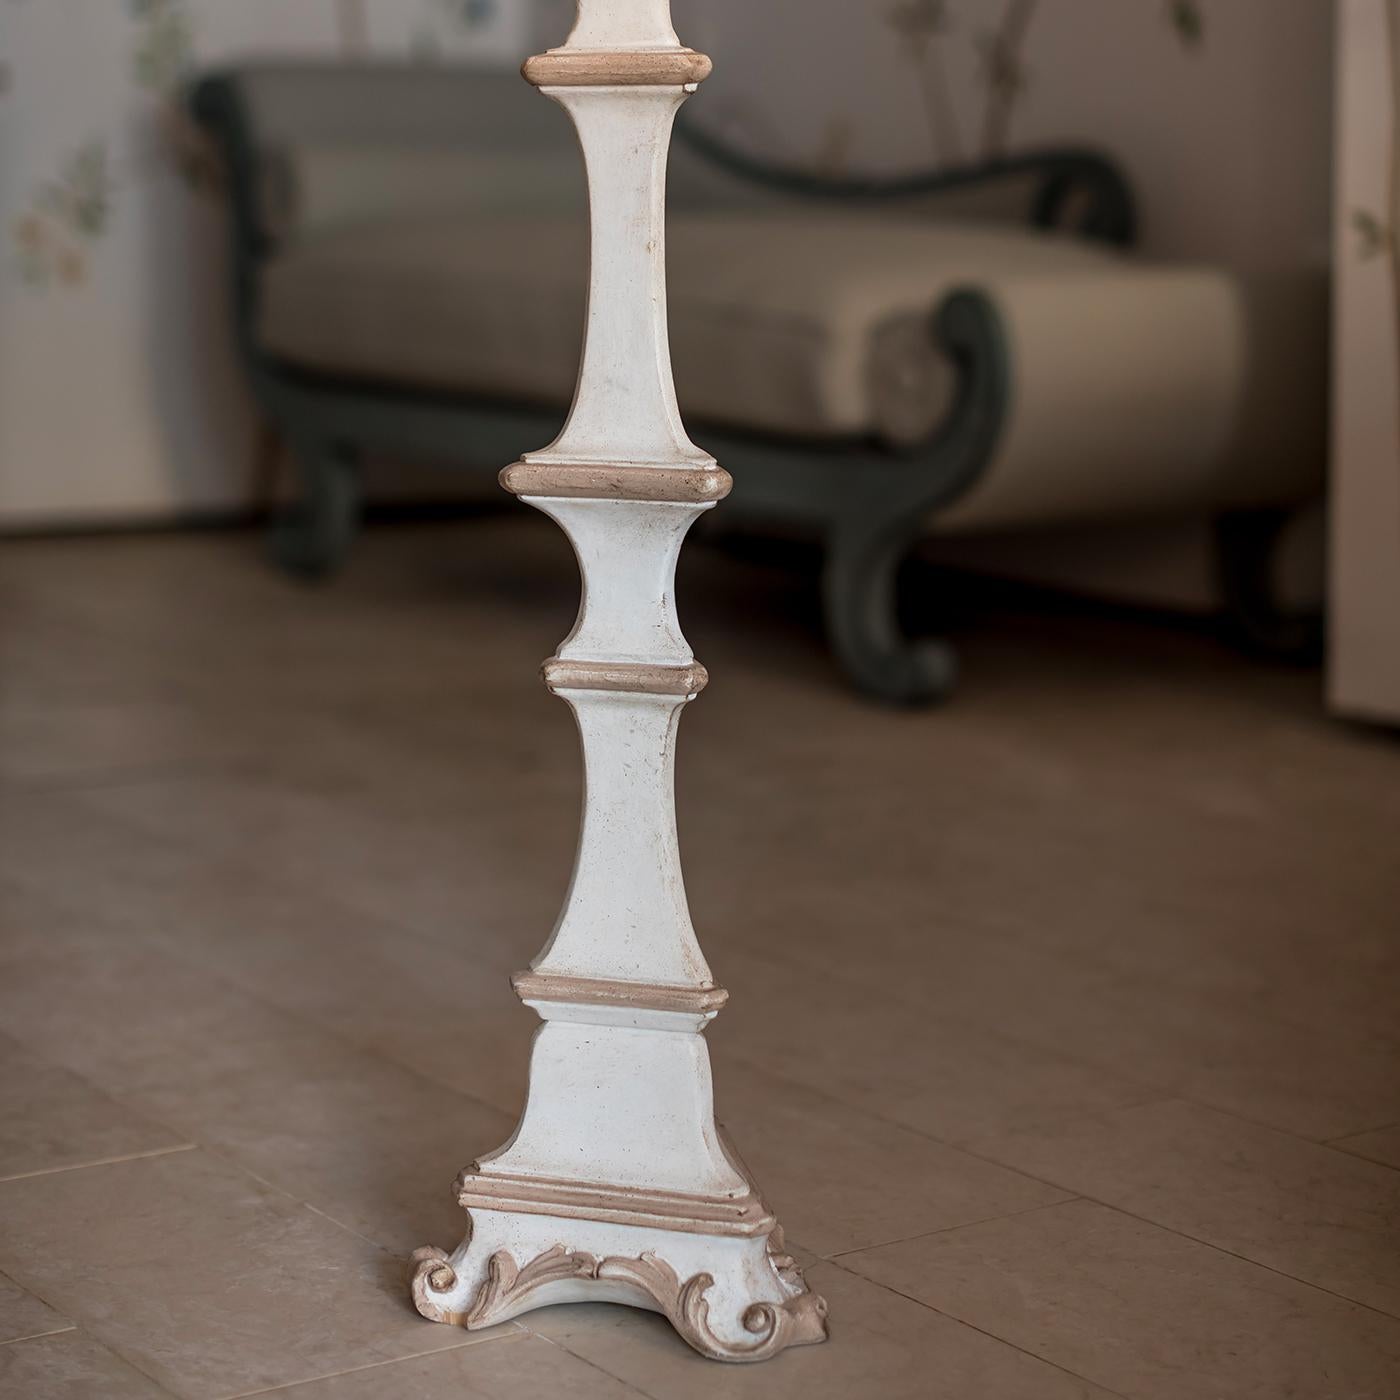 Carved and hand-decorated wooden candle holder. The Venetian style gives sobriety and elegance to a work of great value, whose colors and decorations are at the discretion of the customer, in order to perfectly coordinate this artwork with the rest